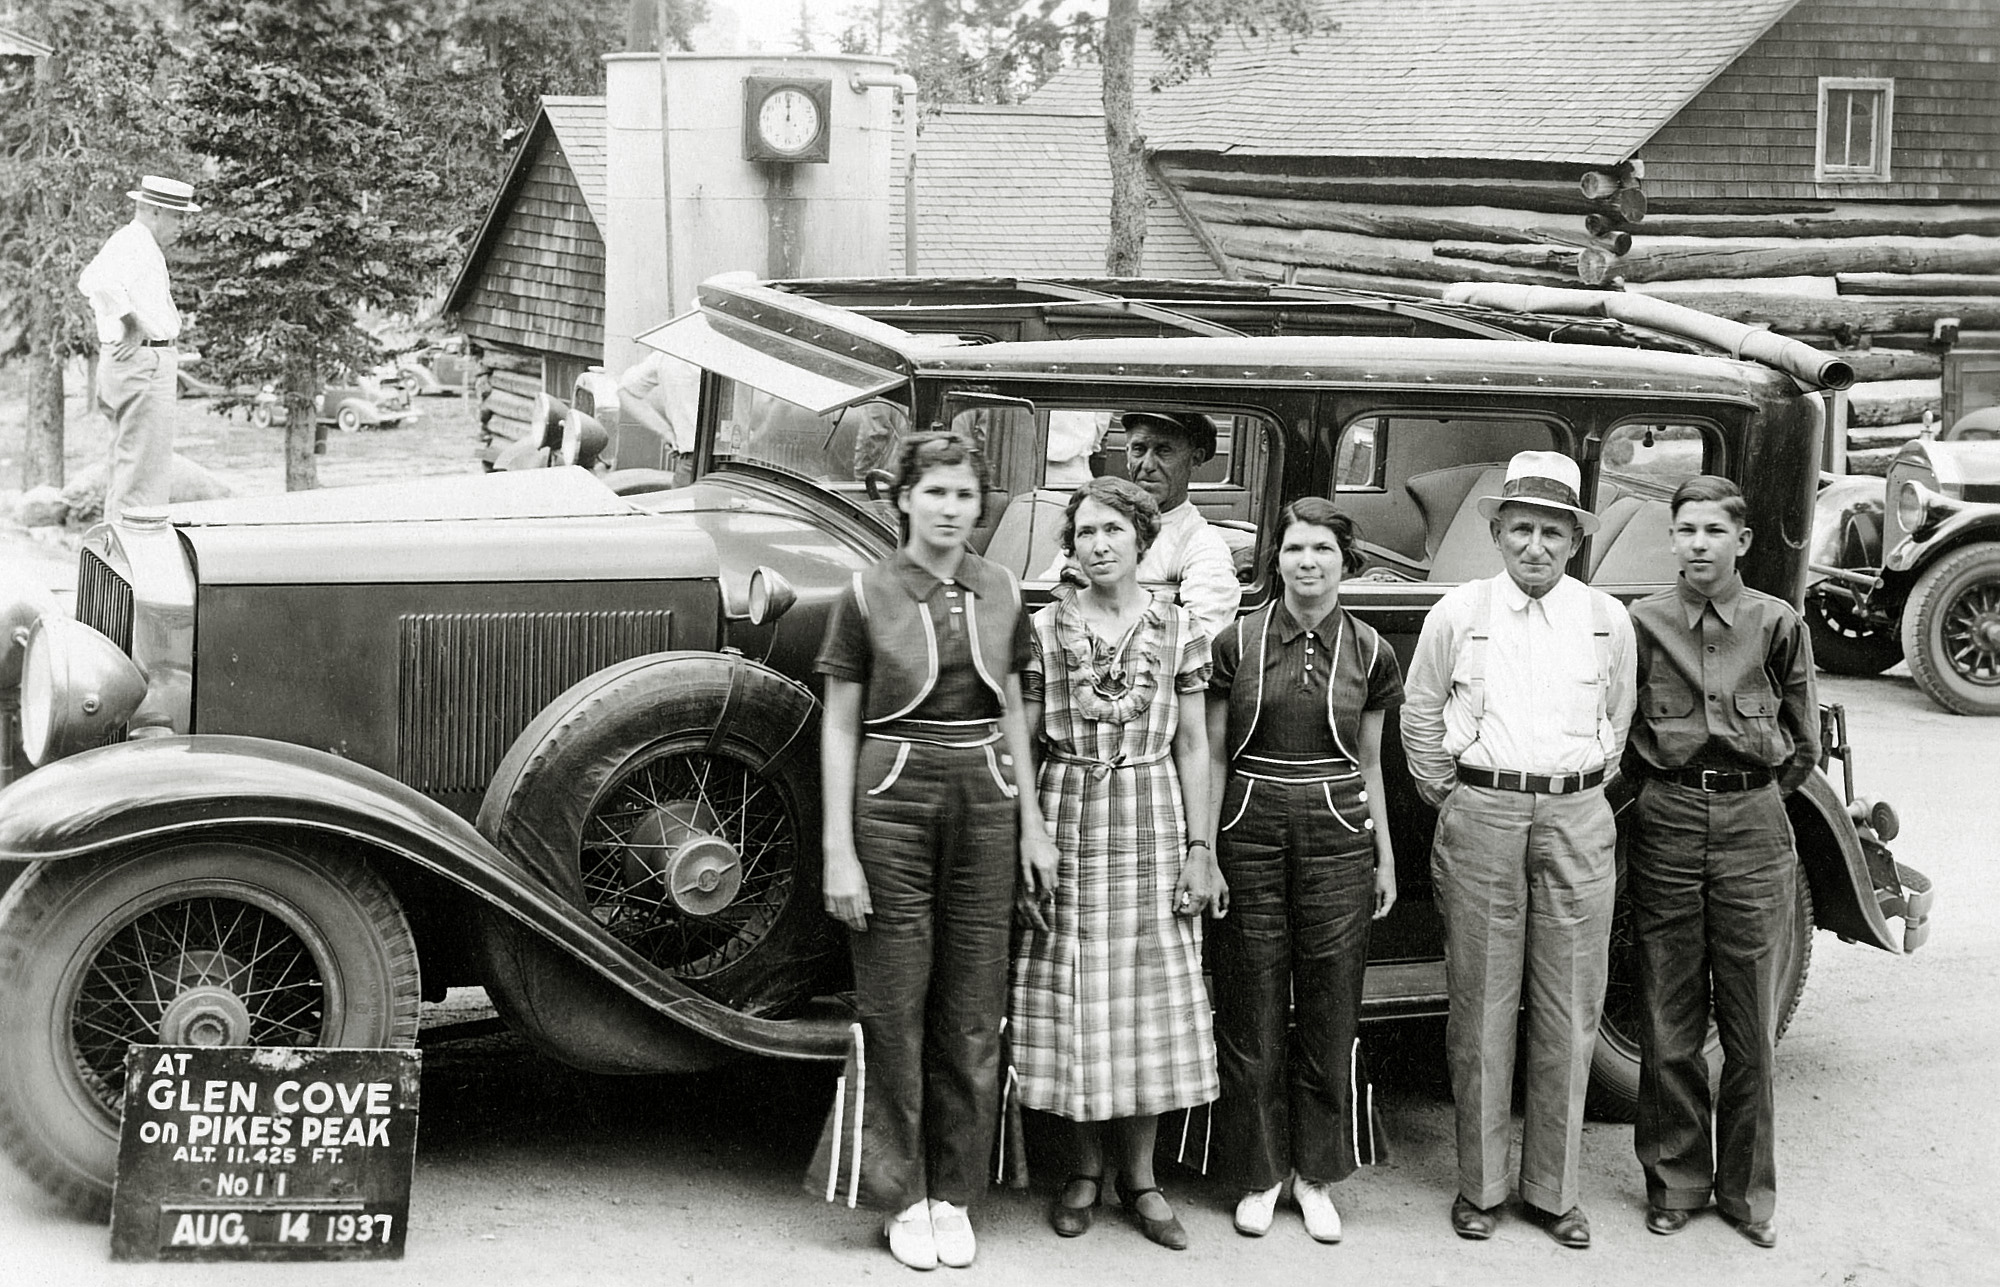 Taken near Pike's Peak, Colorado, my great grandfather's brother, George W. Downing, poses with his wife, family,  and one great automobile. View full size.